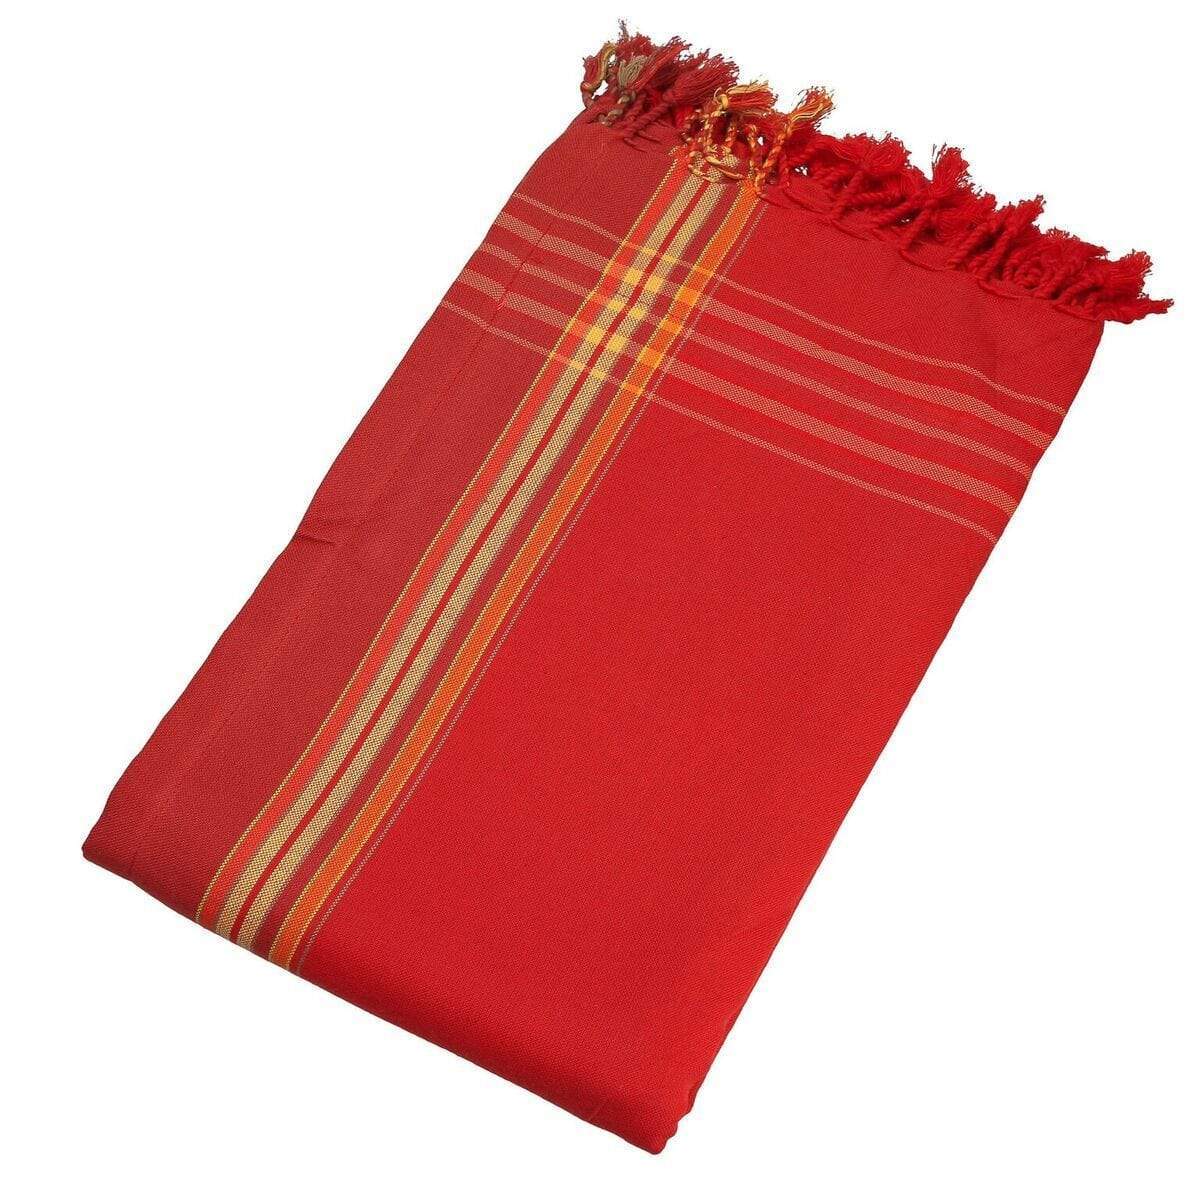 HomeRoots Outdoors Home Decor > Throws Red / Cotton, Towel, Polyester 0.82" X 1.31" X 0.07" Rio Grande Cotton, Polyester Kikoy-Towel